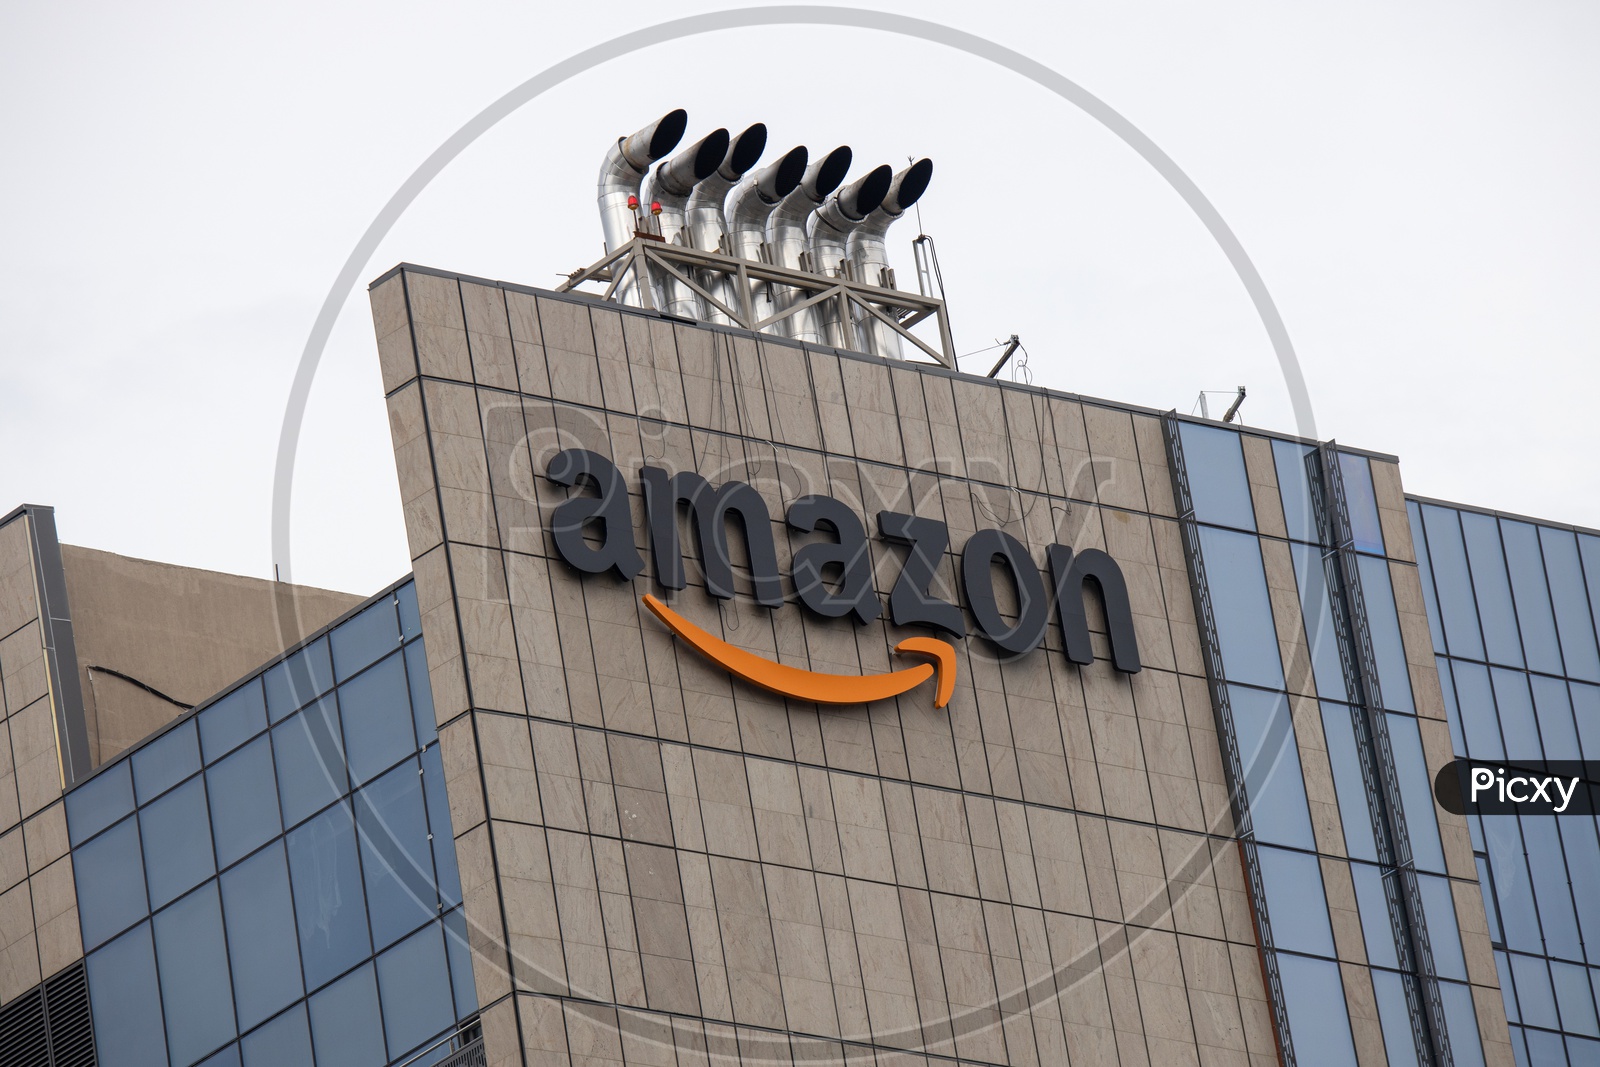 New Amazon Corporate Campus in Financial District,Hyderabad.